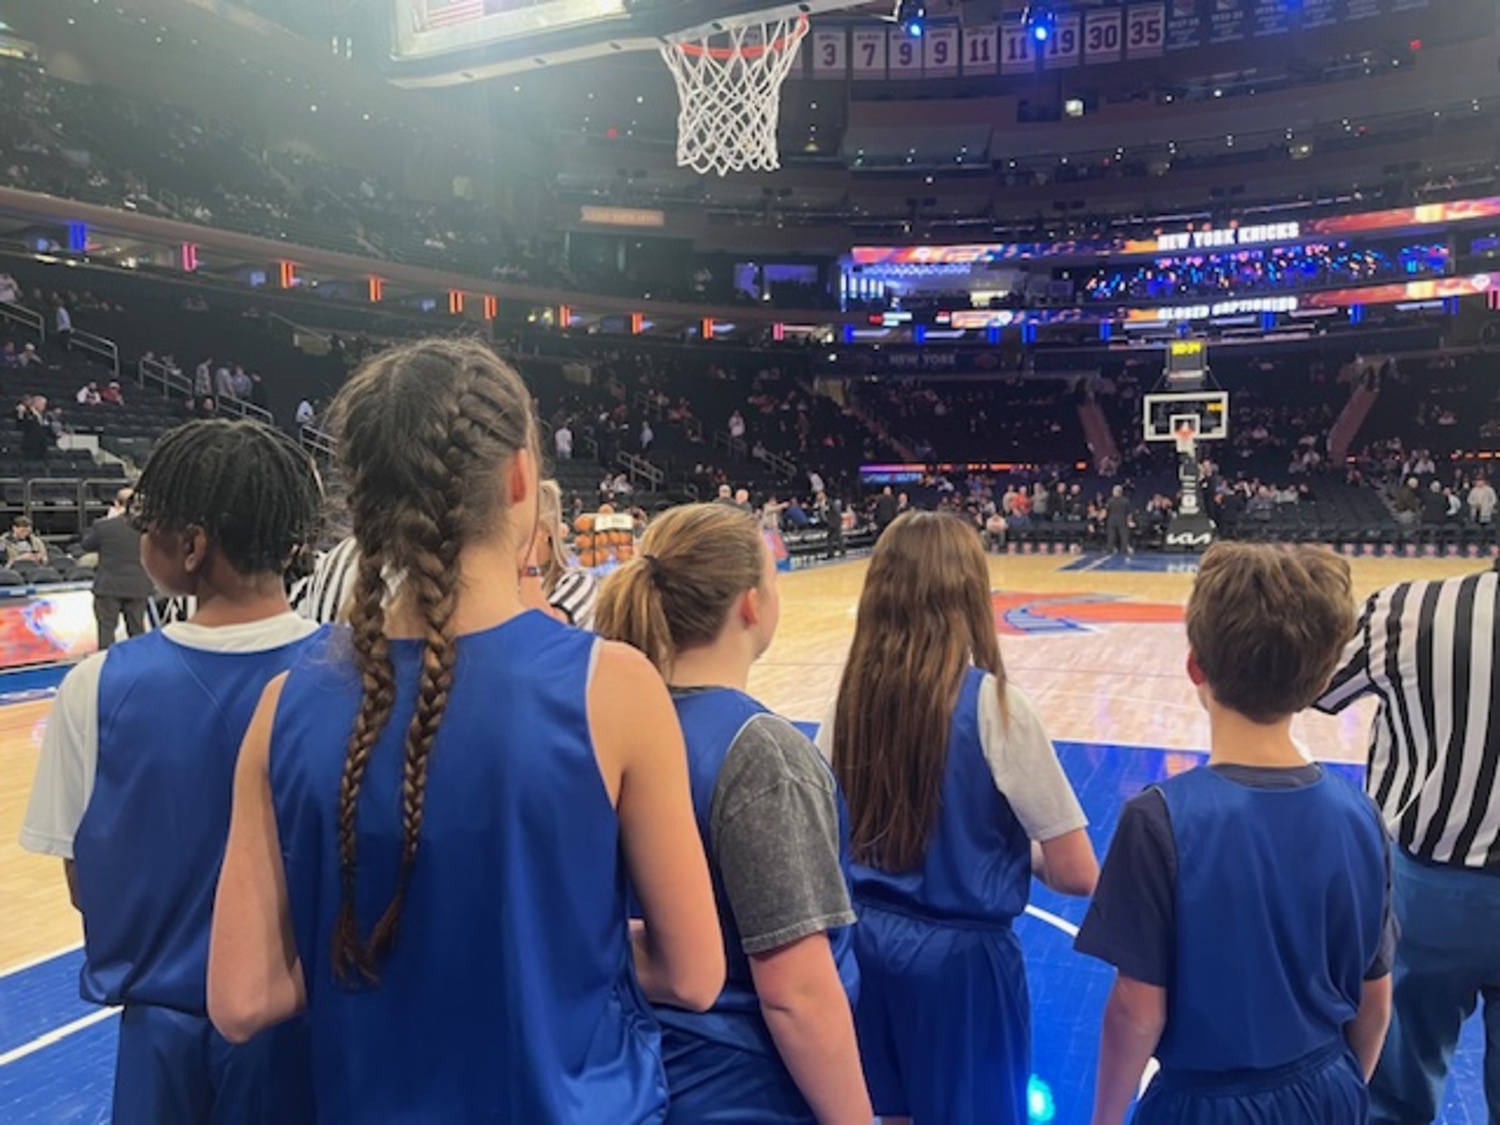 Bridgehampton Union Free School District, in conjunction with the Ross School, recently ventured on a unique and interactive field trip to Madison Square Garden. During the visit, Bridgehampton’s boys and girls basketball teams played on the court as part of a Jr. Knicks scrimmage before the NBA game against the Memphis Grizzlies. The experience was inspiring for those with aspirations to continue in Bridgehampton’s high school basketball program. COURTESY BRIDGEHAMPTON SCHOOL